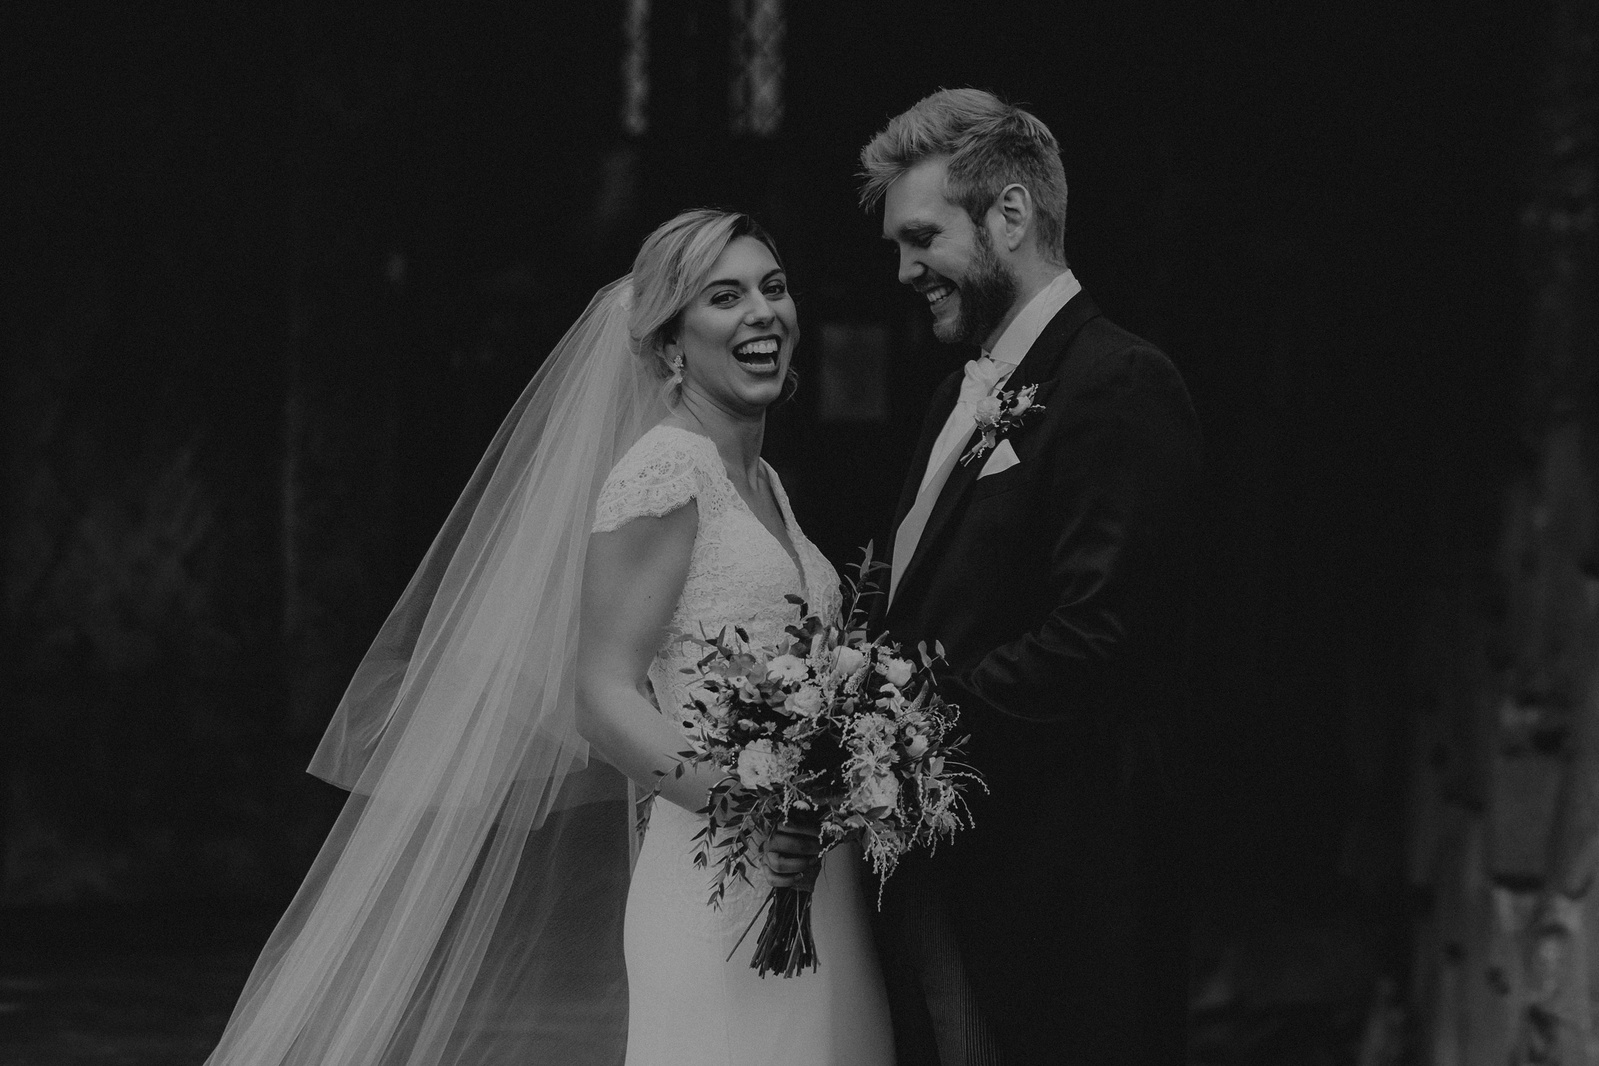 Couple sharing a joke after their wedding ceremony 